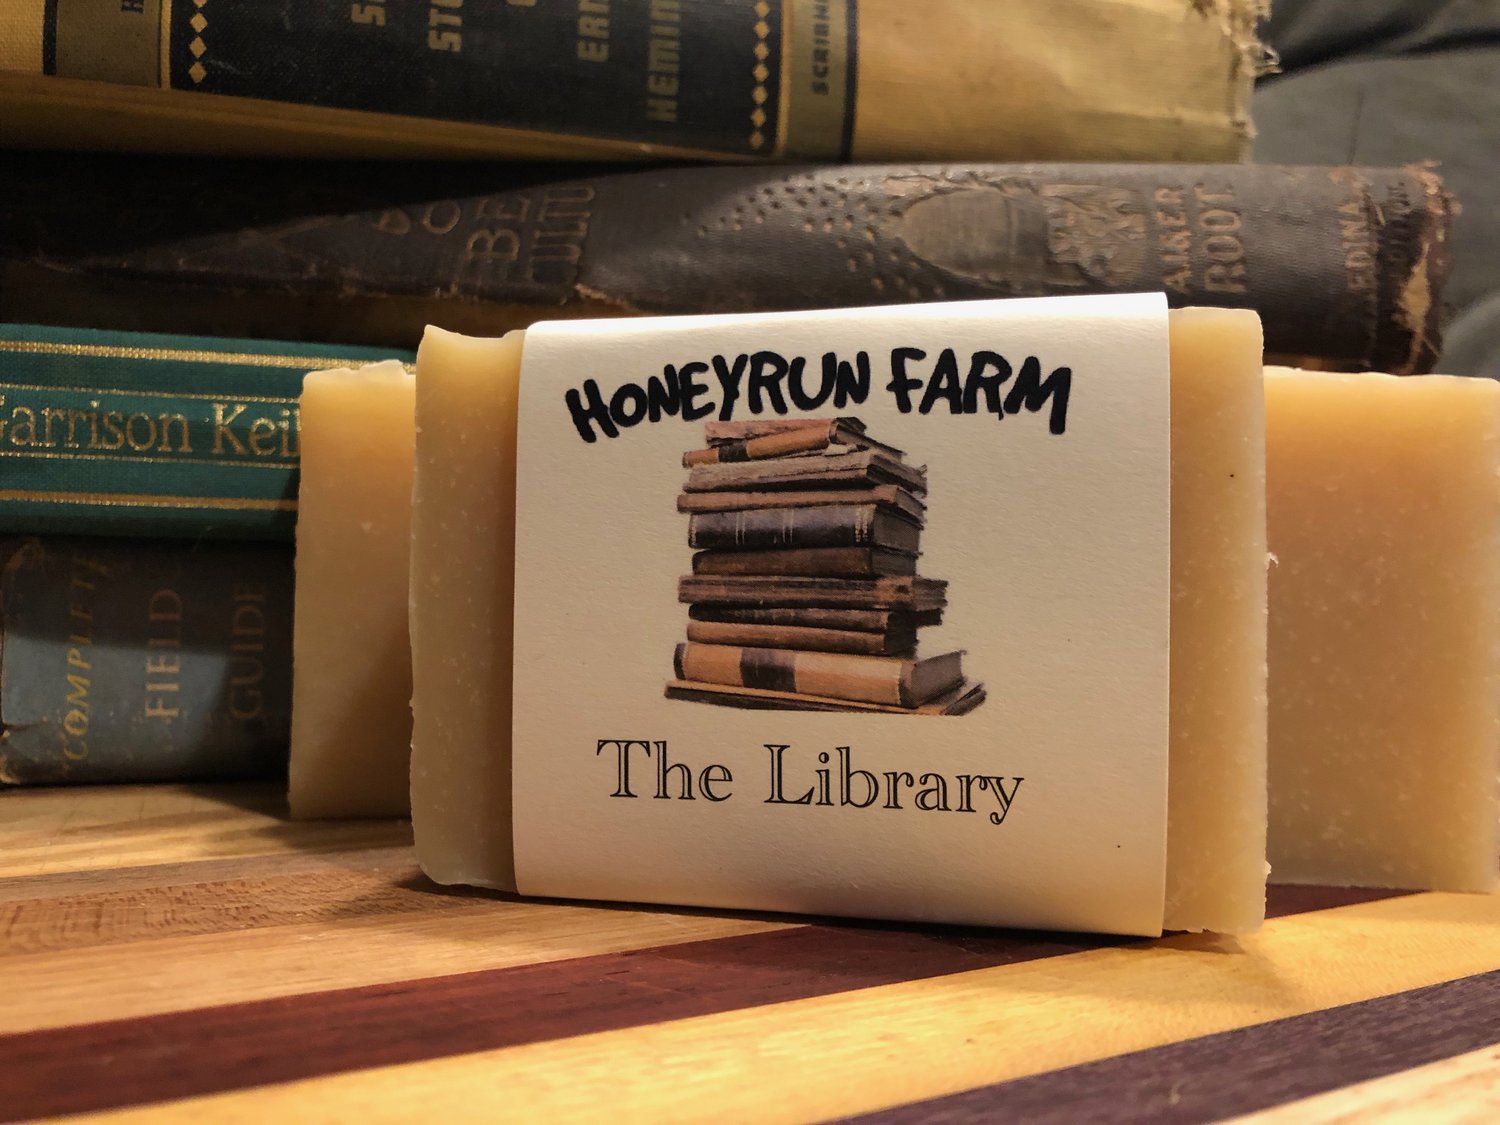 Davenport Public Library to demonstrate how to make homemade soap